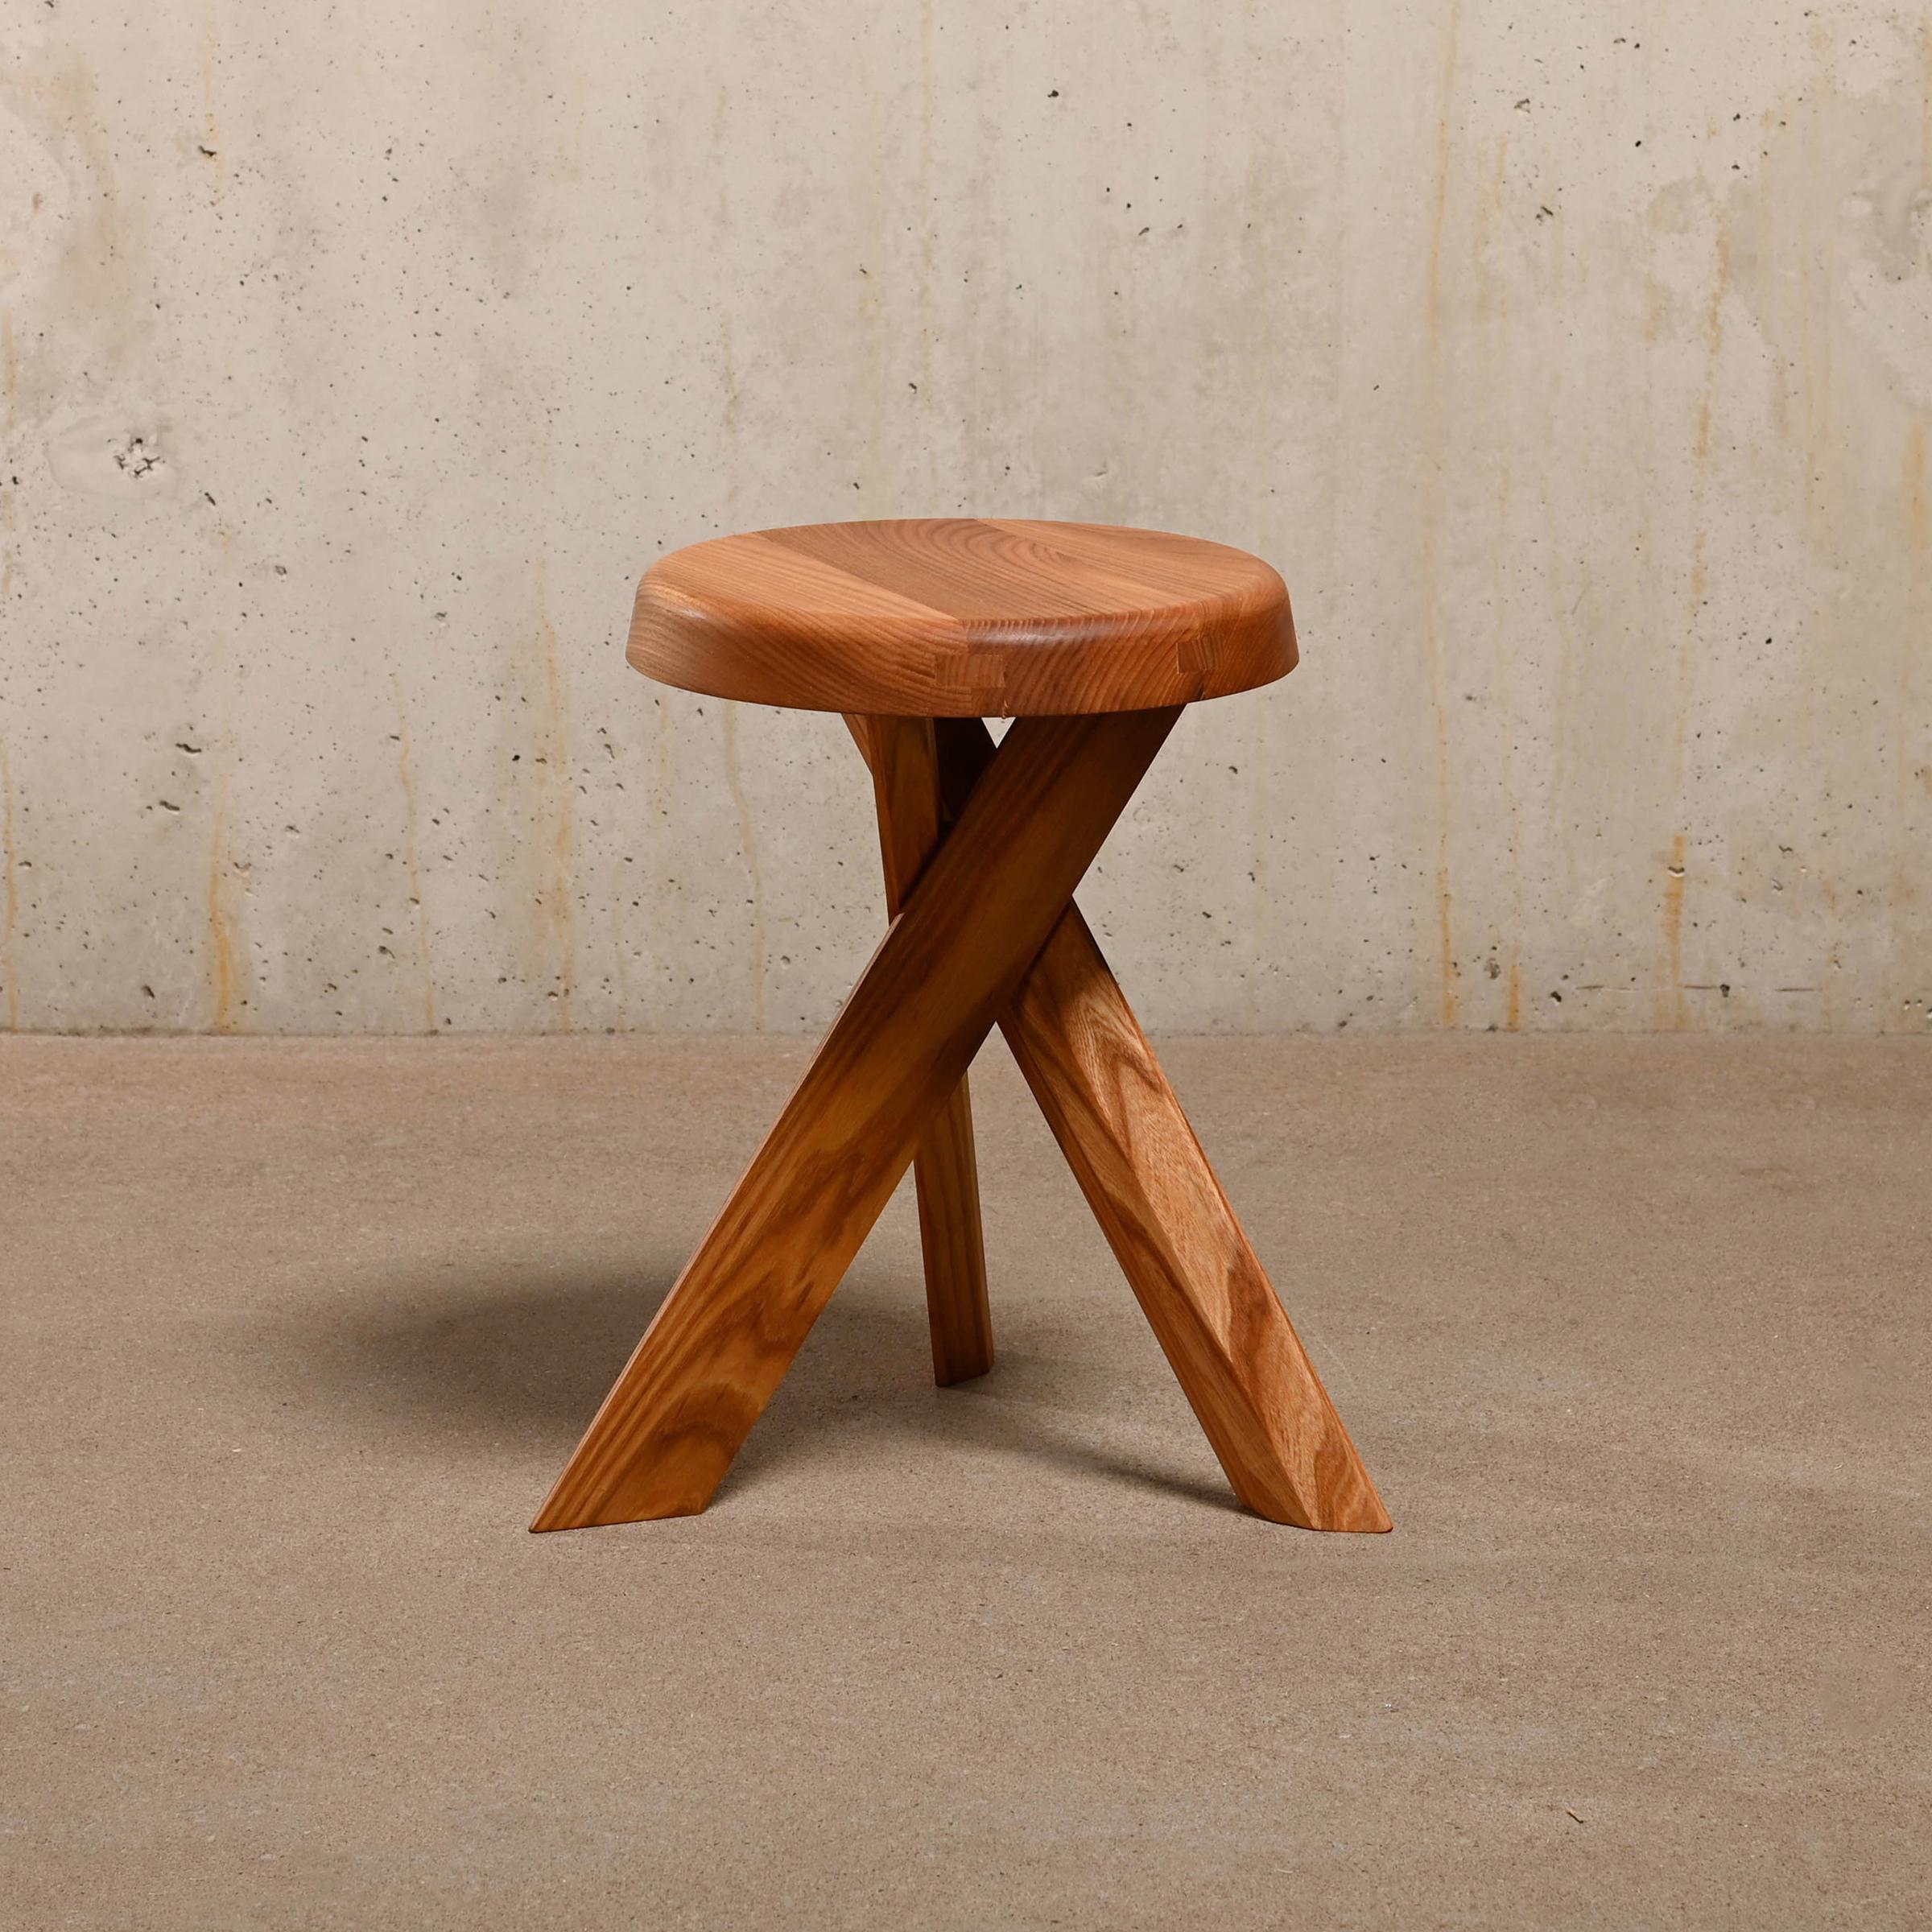 Stool S31 (model A) designed by Pierre Chapo around 1960 and manufactured by Chapo Création in France, 2024. Solid elmwood finished in naturel oil. Excellent original condition and signed by manufacture stamp. The wood drawing and grain of the stool